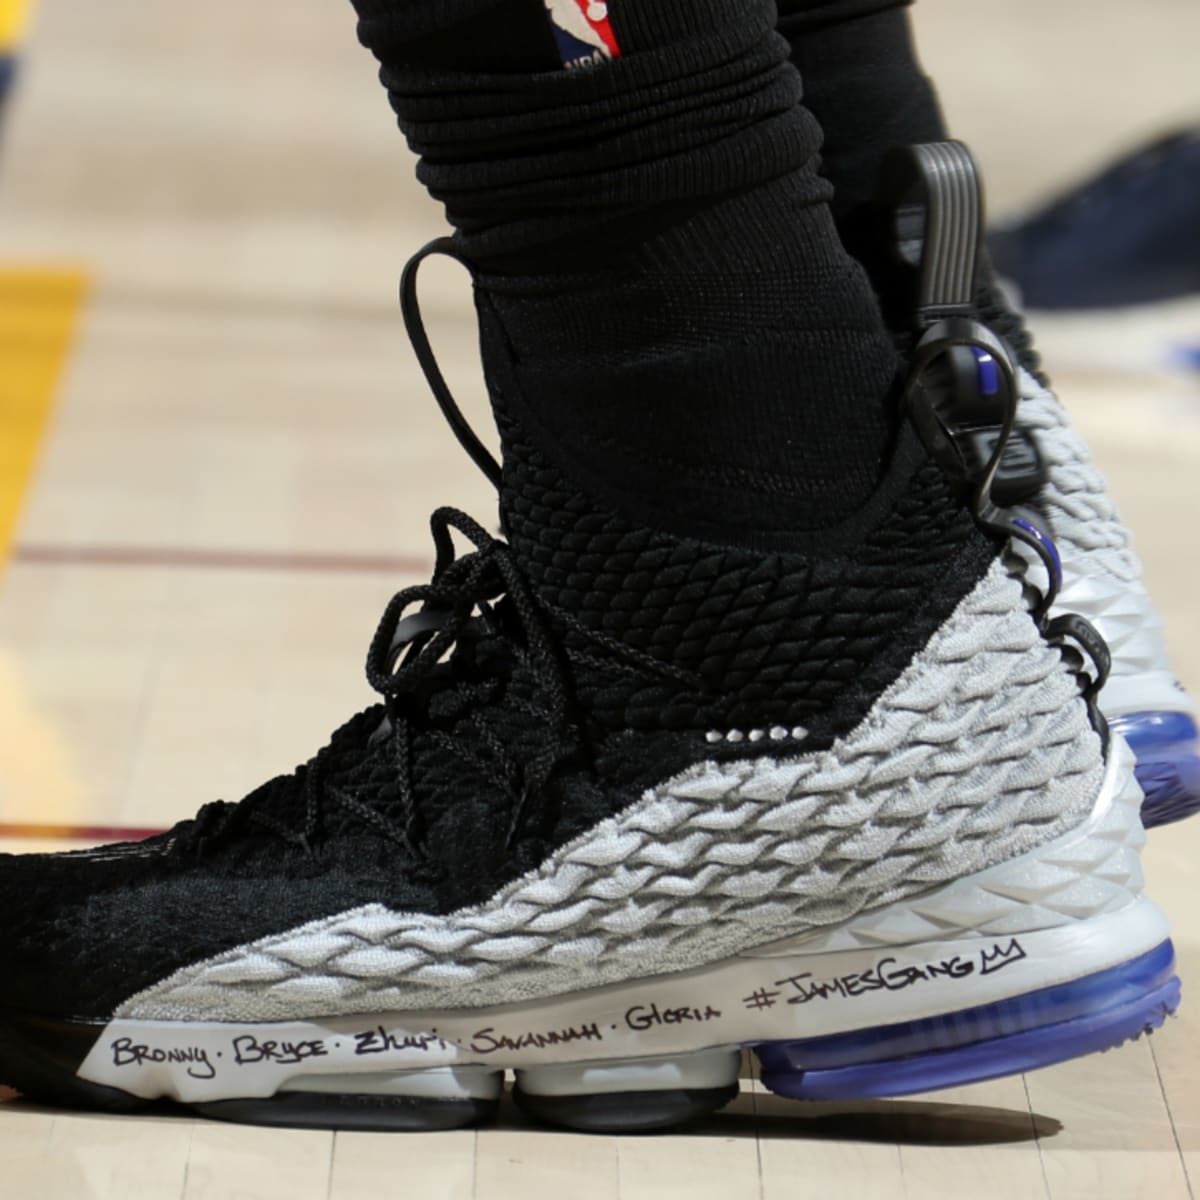 LeBron James Signature Sneakers: Ranking the Best of the King - Sports  Illustrated